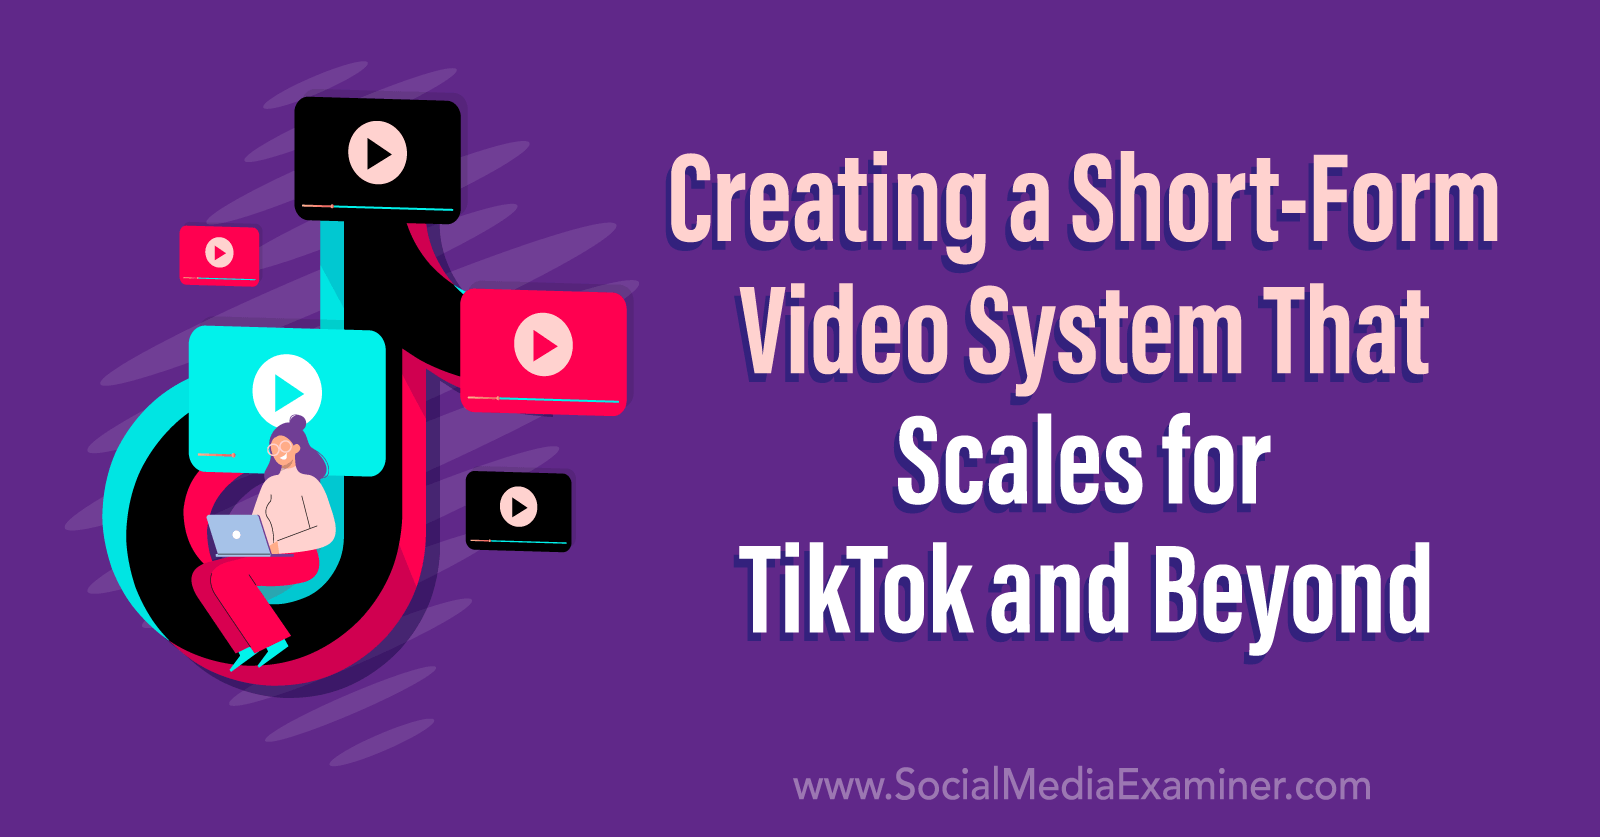 Creating a Short-Form Video System That Scales for TikTok and Beyond by Social Media Examiner